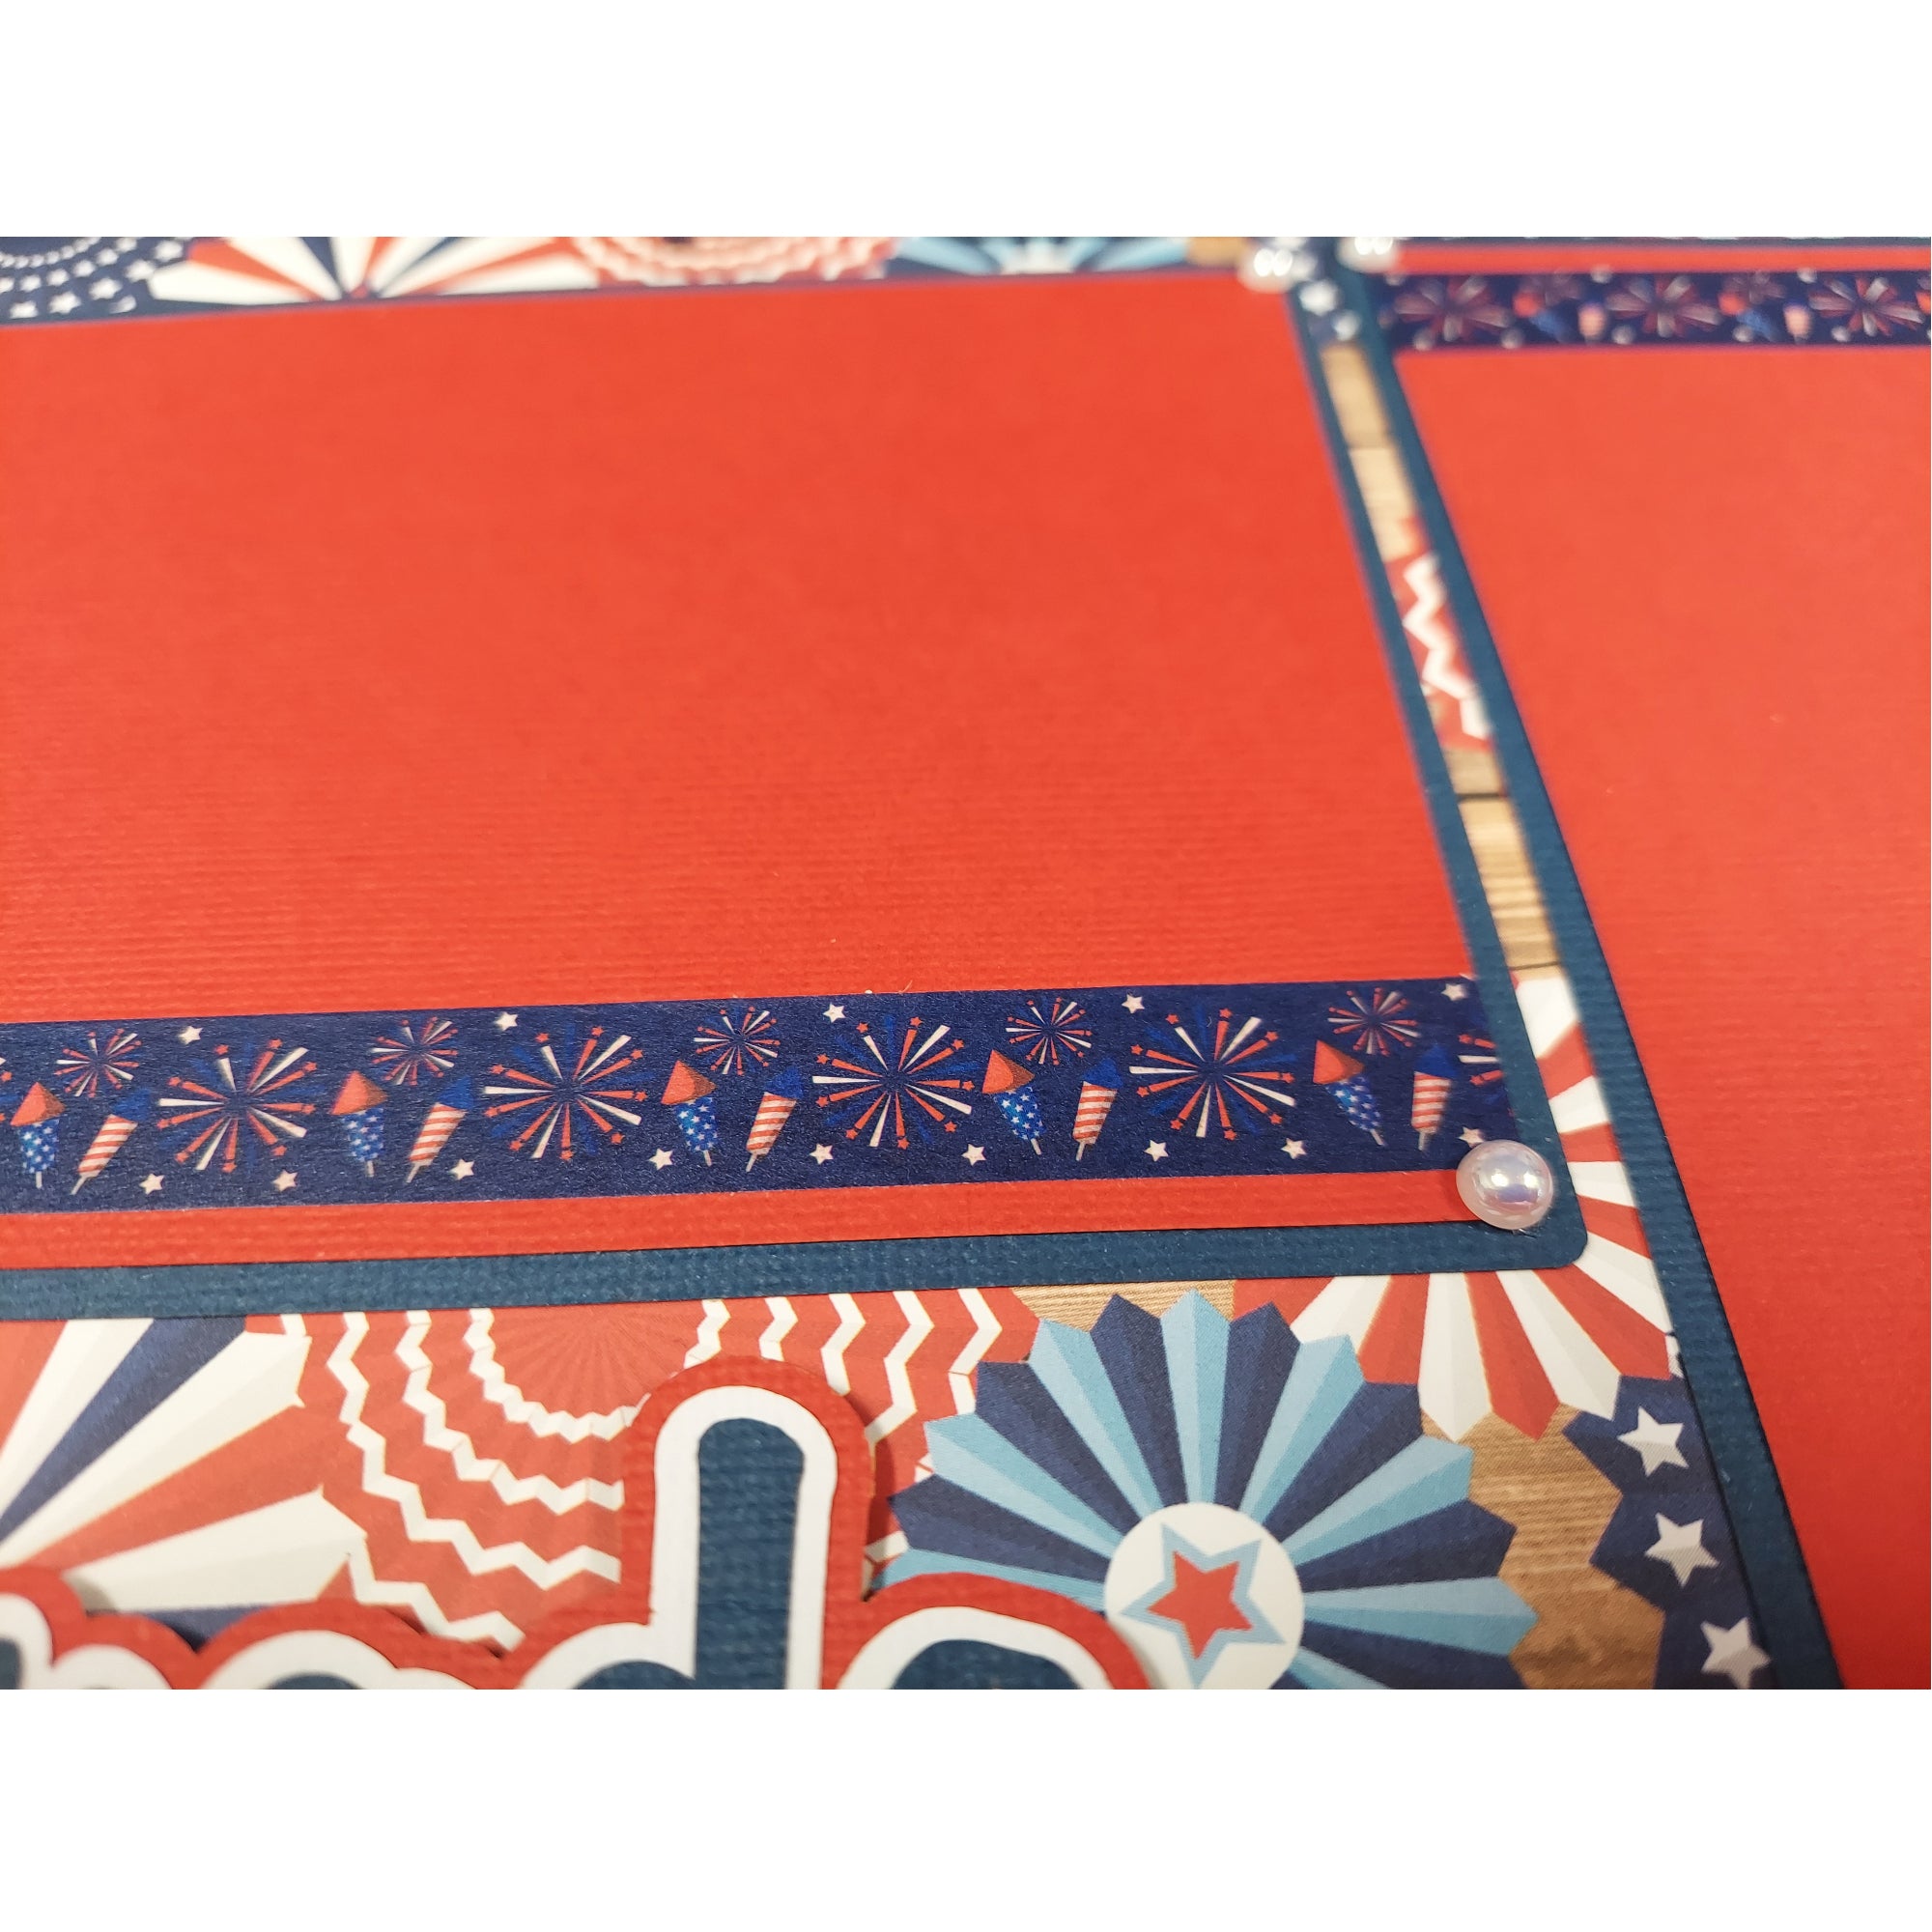 4th Of July (2) - 12 x 12 Pages, Fully-Assembled & Hand-Crafted 3D Scrapbook Premade by SSC Designs